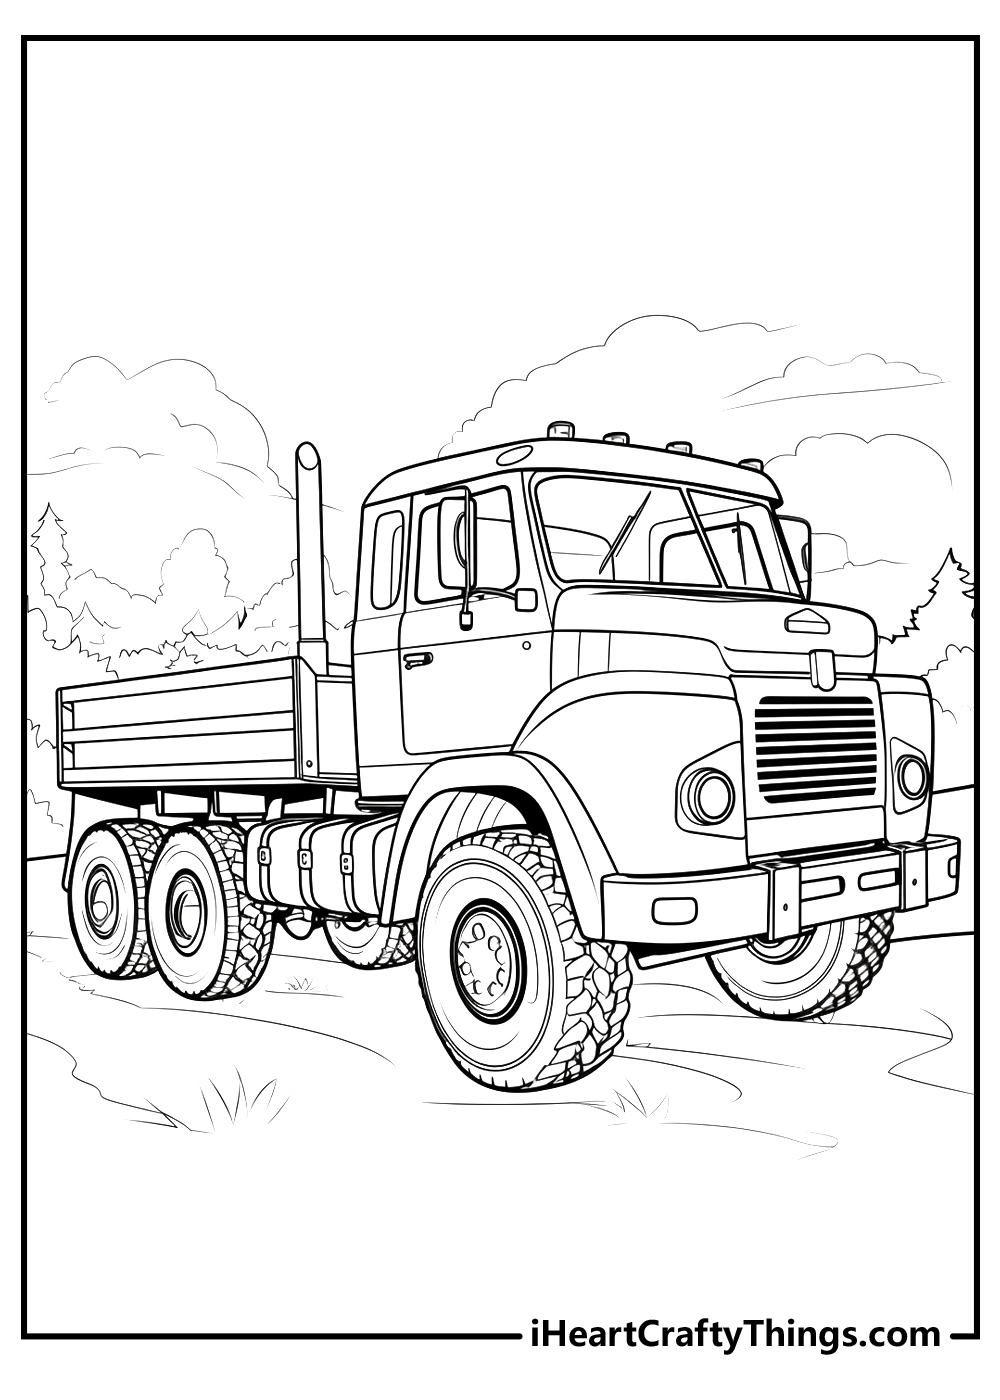 Truck coloring pages free printables